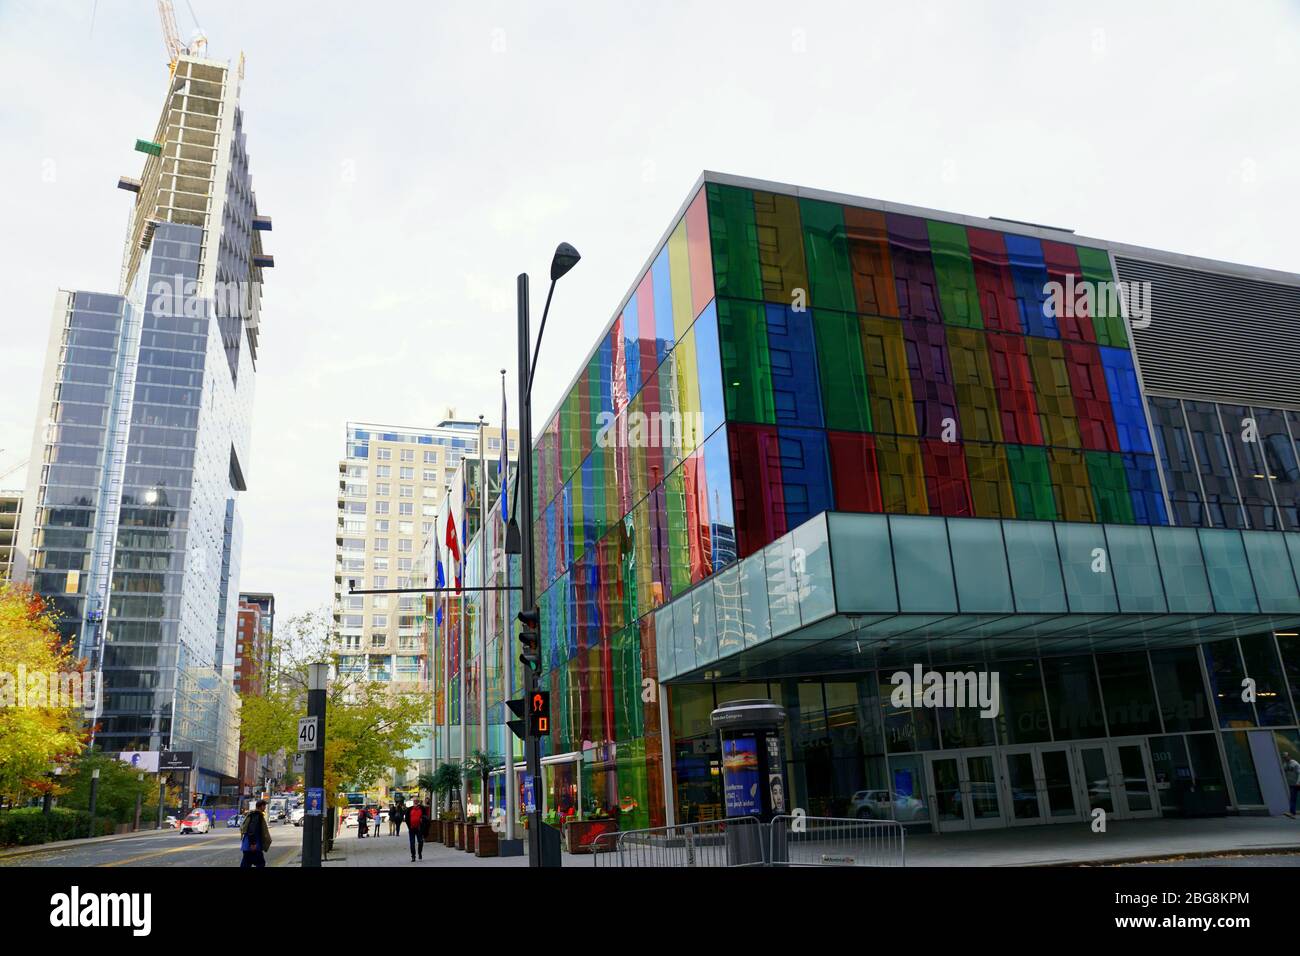 Montreal, Canada - October 27, 2019 - The view of the street near the colorful Palais des Congrès building Stock Photo